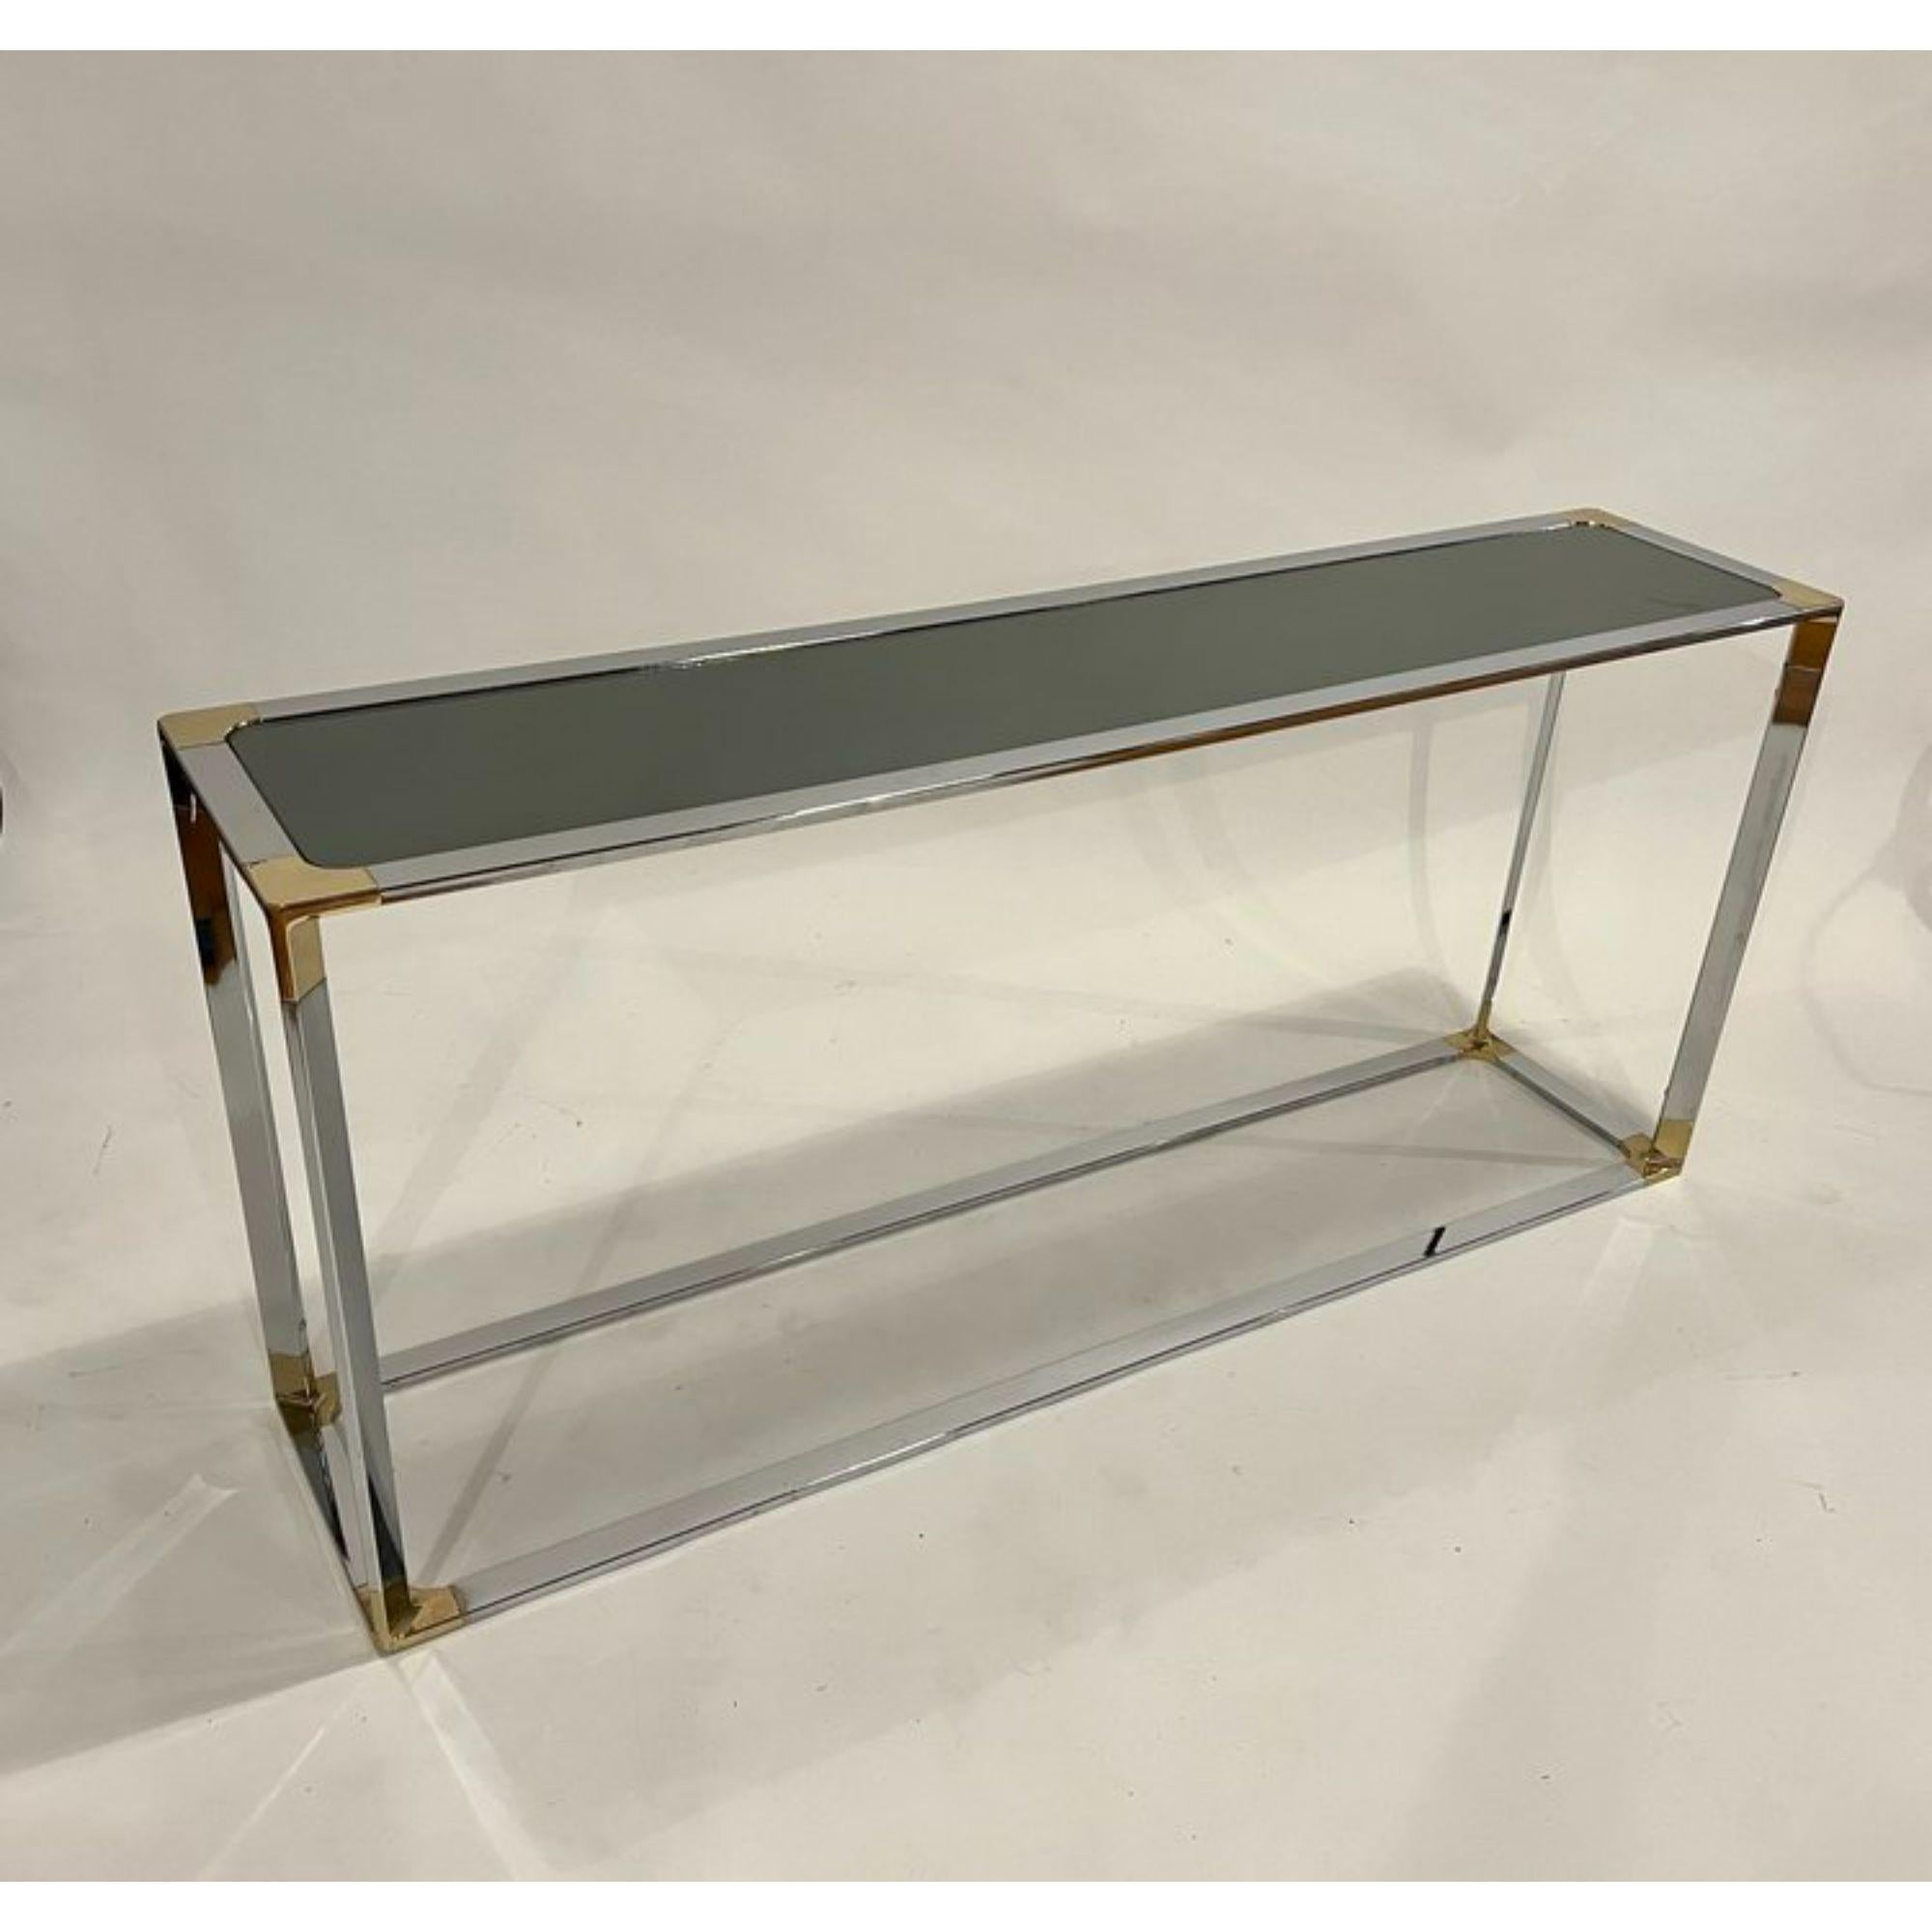 1970's chrome console or sofa table with brass accents and a smoky mirror top.

Additional Information:
Materials: Chrome, Brass accents, Mirror
Style: Mid-Century Modern, Minimalist, Modern
Table Shape: Rectangle
Styled After: Milo Baughman Romeo